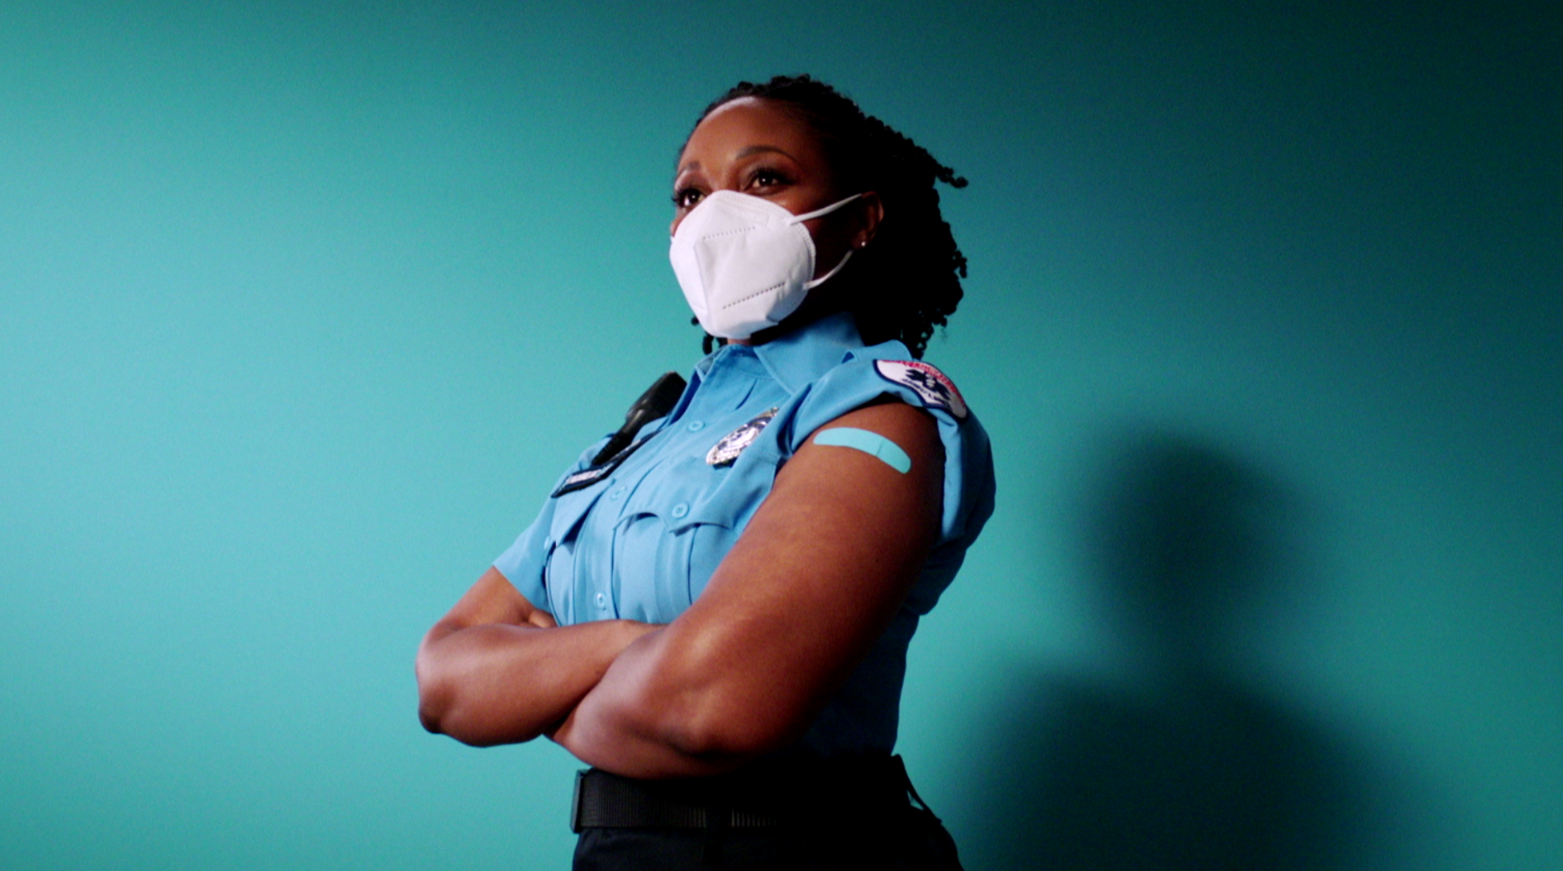 A Black woman wearing a mask crosses her arms and is wearing a band aid on her shoulder